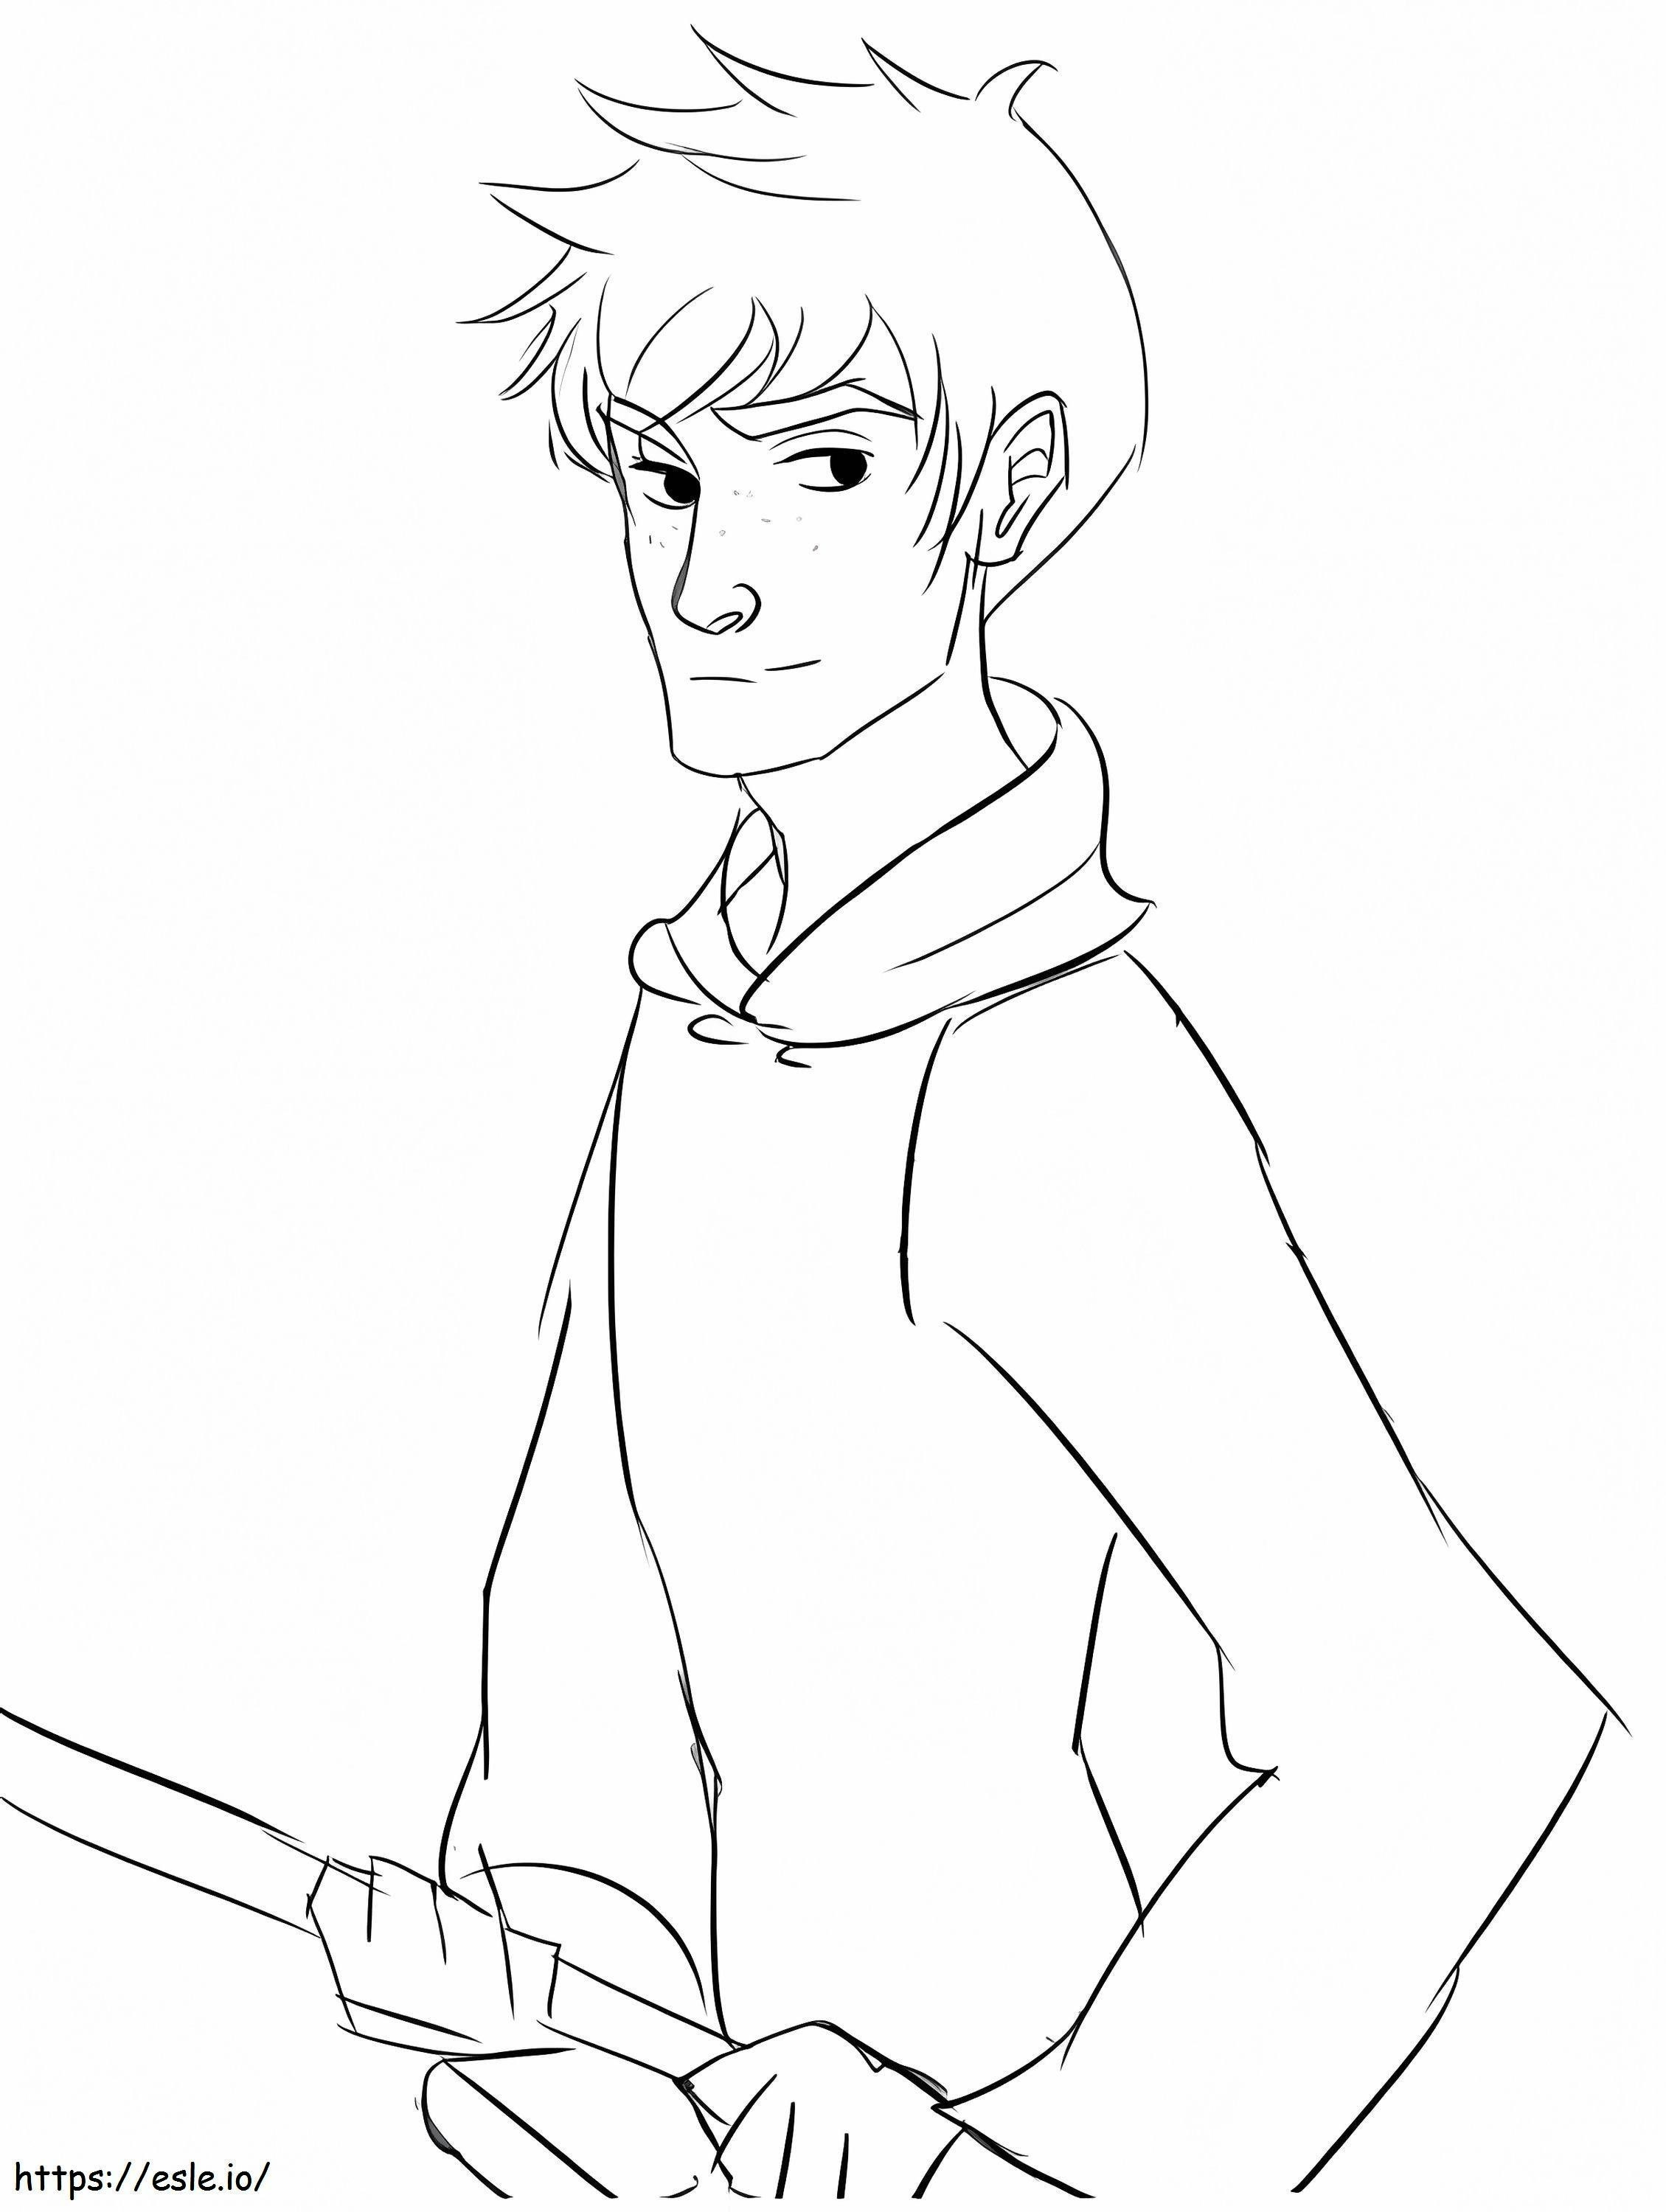 Jack Frost 1 coloring page